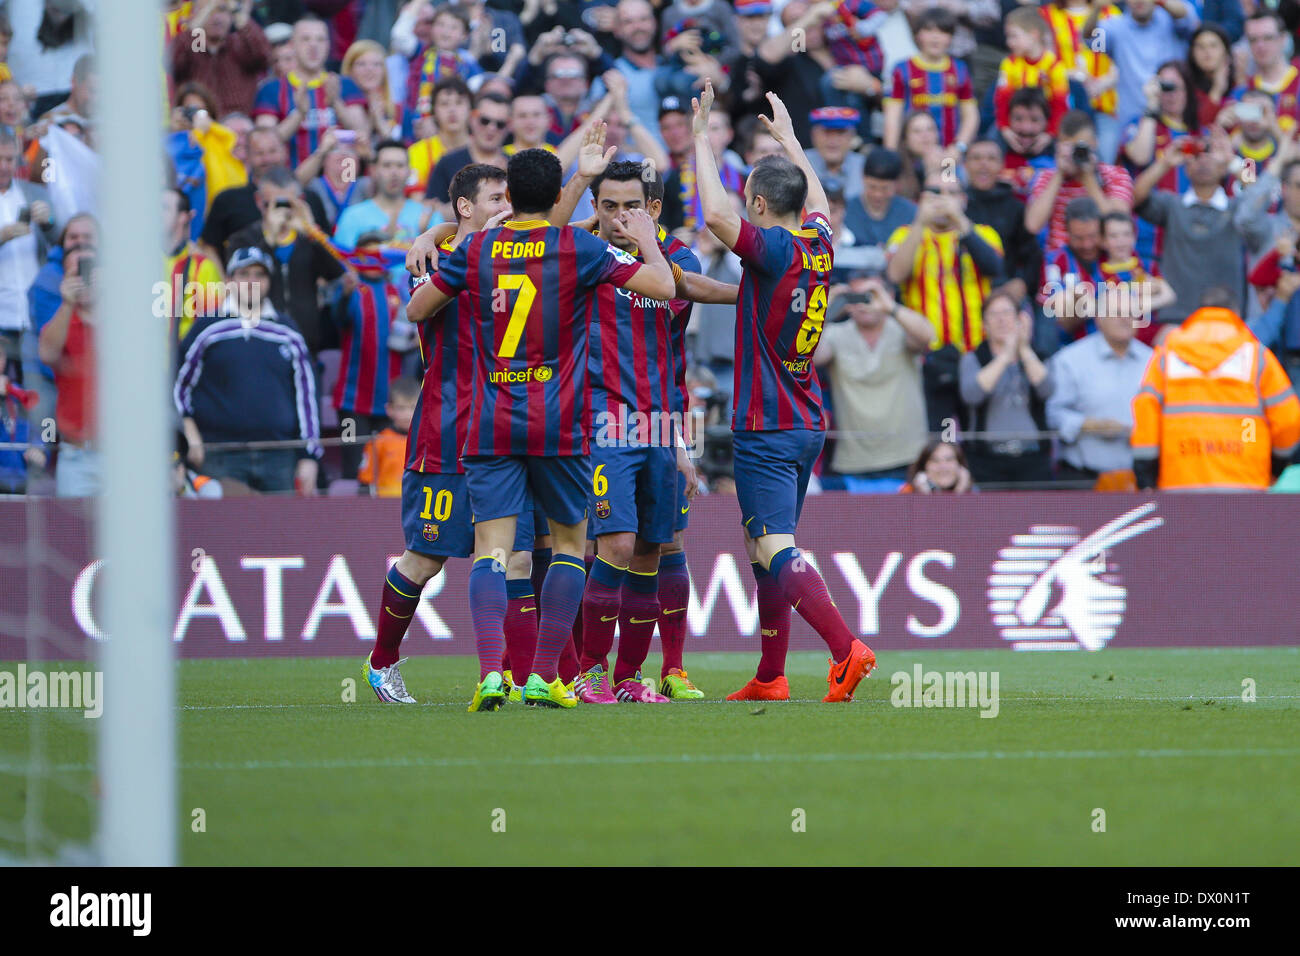 Barcelona, Spain. 16th Mar, 2014. FC Barcelona players celebrating the goal of Leo Messi at the match of the week 28 of the spanish Liga BBVA between FC Barcelona and Osasuna, at the Camp Nou stadium in Barcelona, Spain, on March 16, 2014. Photo: Aline Delfim/Urbanandsport/Nurphoto. Credit:  Urbanandsport/NurPhoto/ZUMAPRESS.com/Alamy Live News Stock Photo